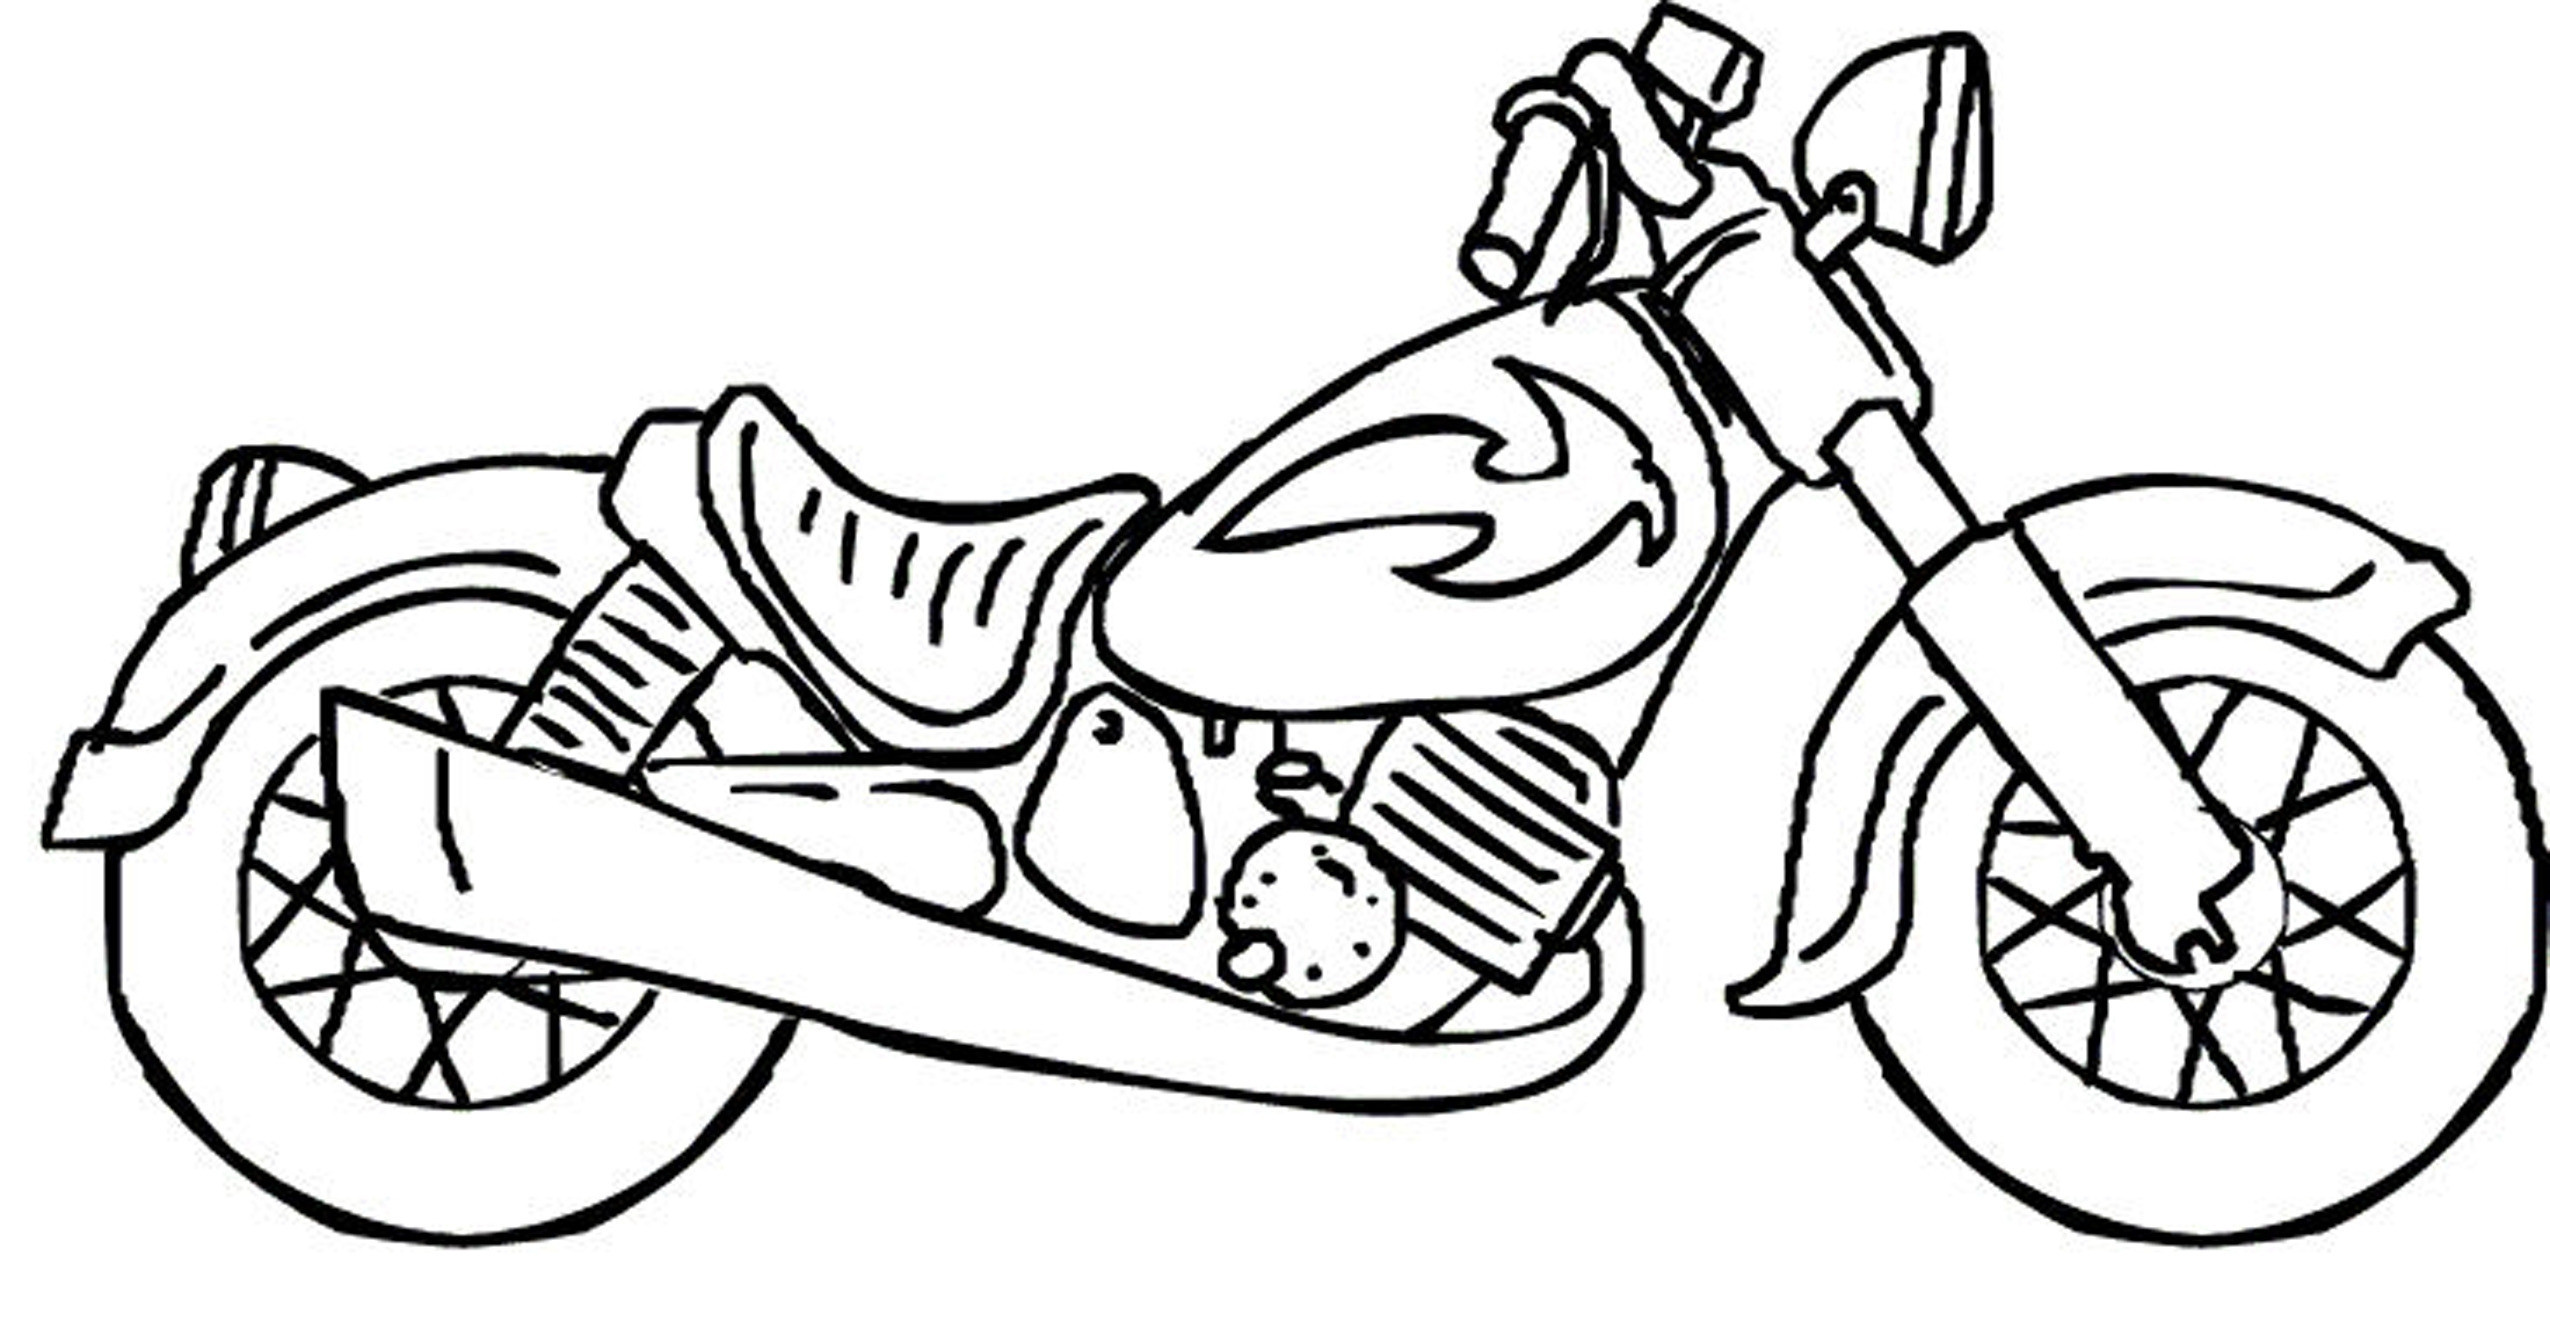 Coloring Pages For Boys Designed
 New Coloring Pages for Boys Cars